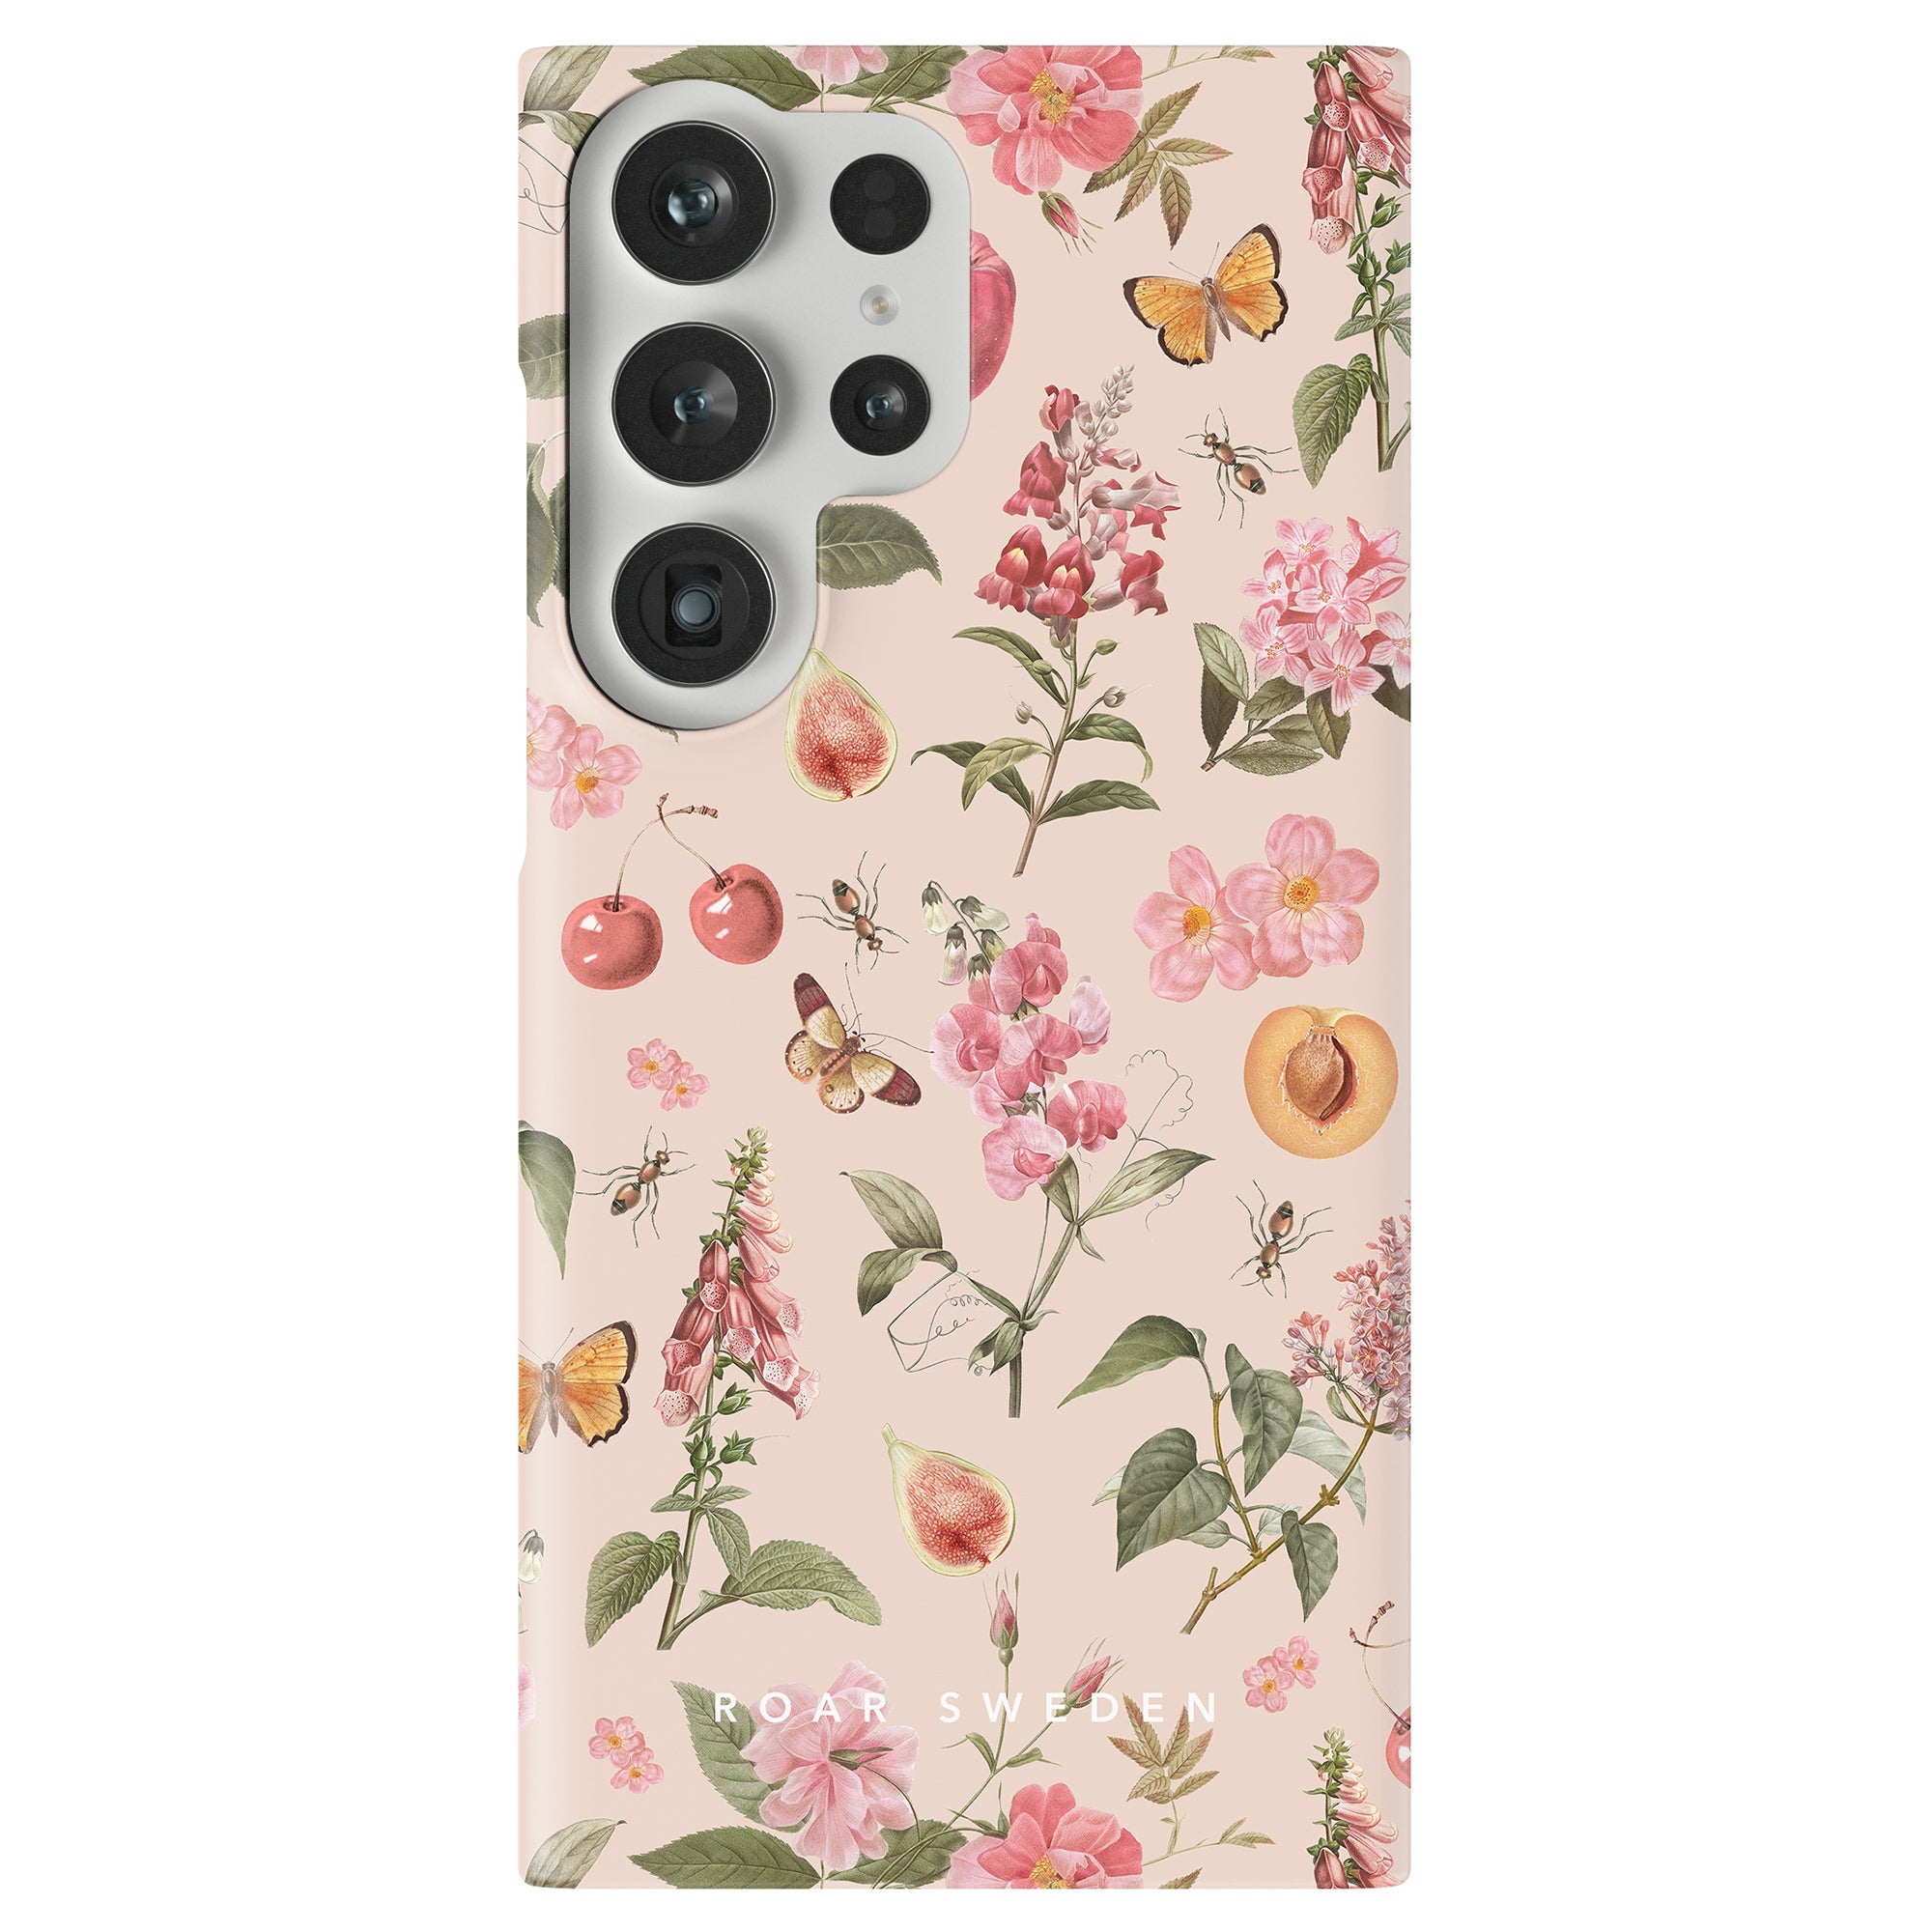 A smartphone with a Romantic Spring - Slim case featuring multiple camera lenses designed for enhanced SEO in product descriptions.